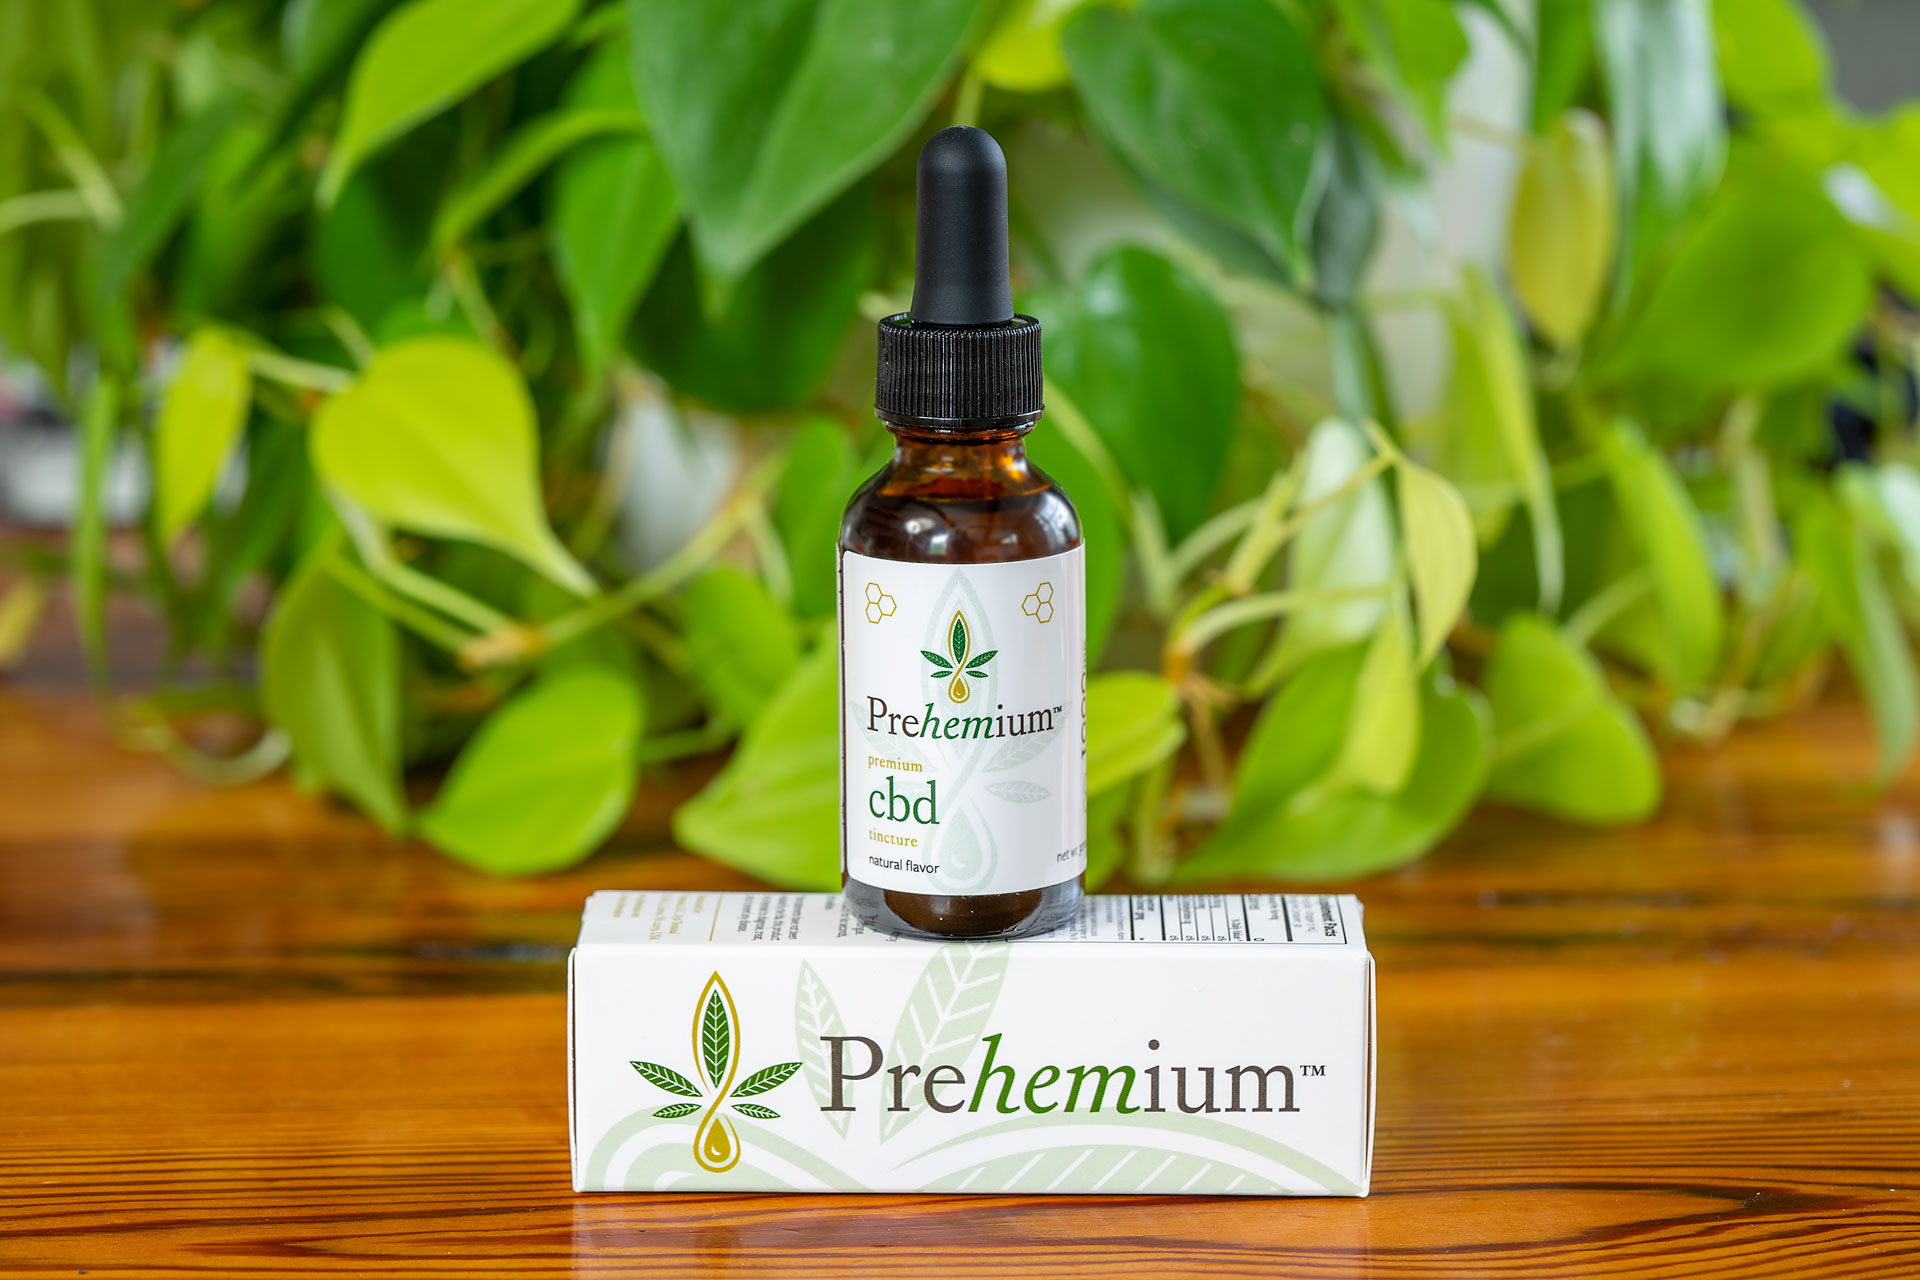 Premium Full-Spectrum CBD Tincture - Natural. Bottle is placed on top of the box which is sideways showcasing the lengthwise prehemium logo.